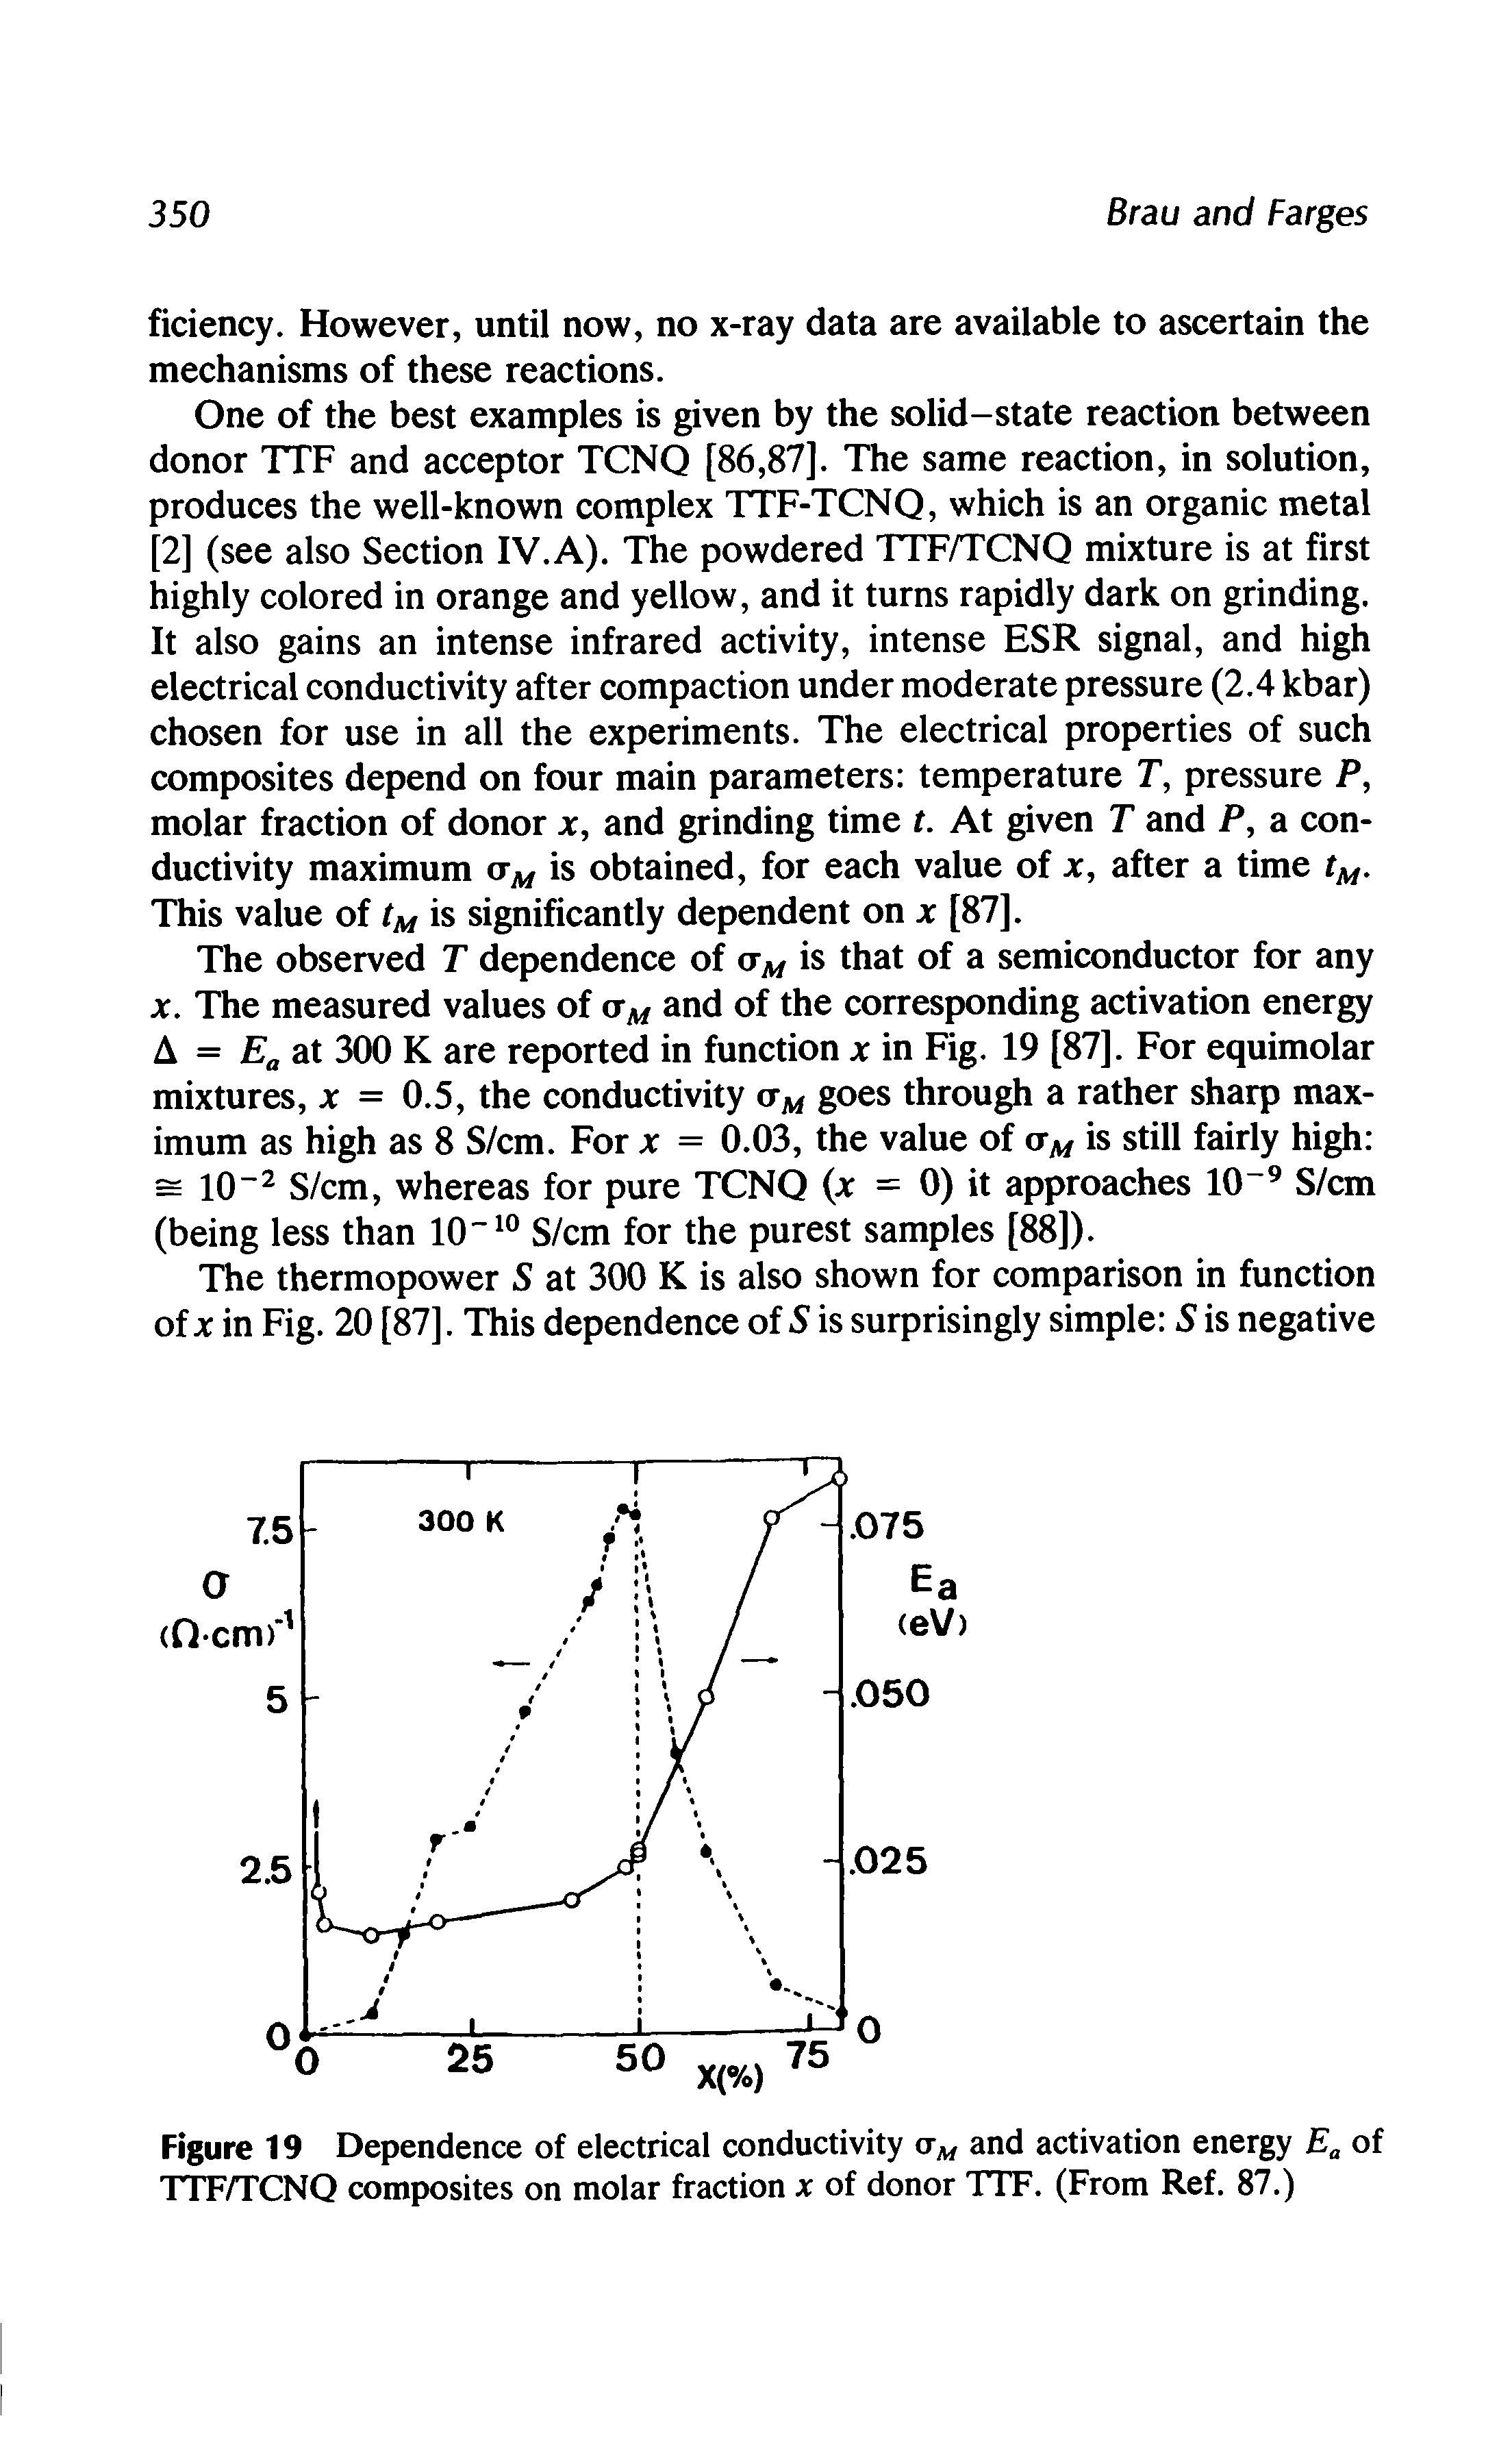 Figure 19 Dependence of electrical conductivity crM and activation energy Ea of TTF/TCNQ composites on molar fraction x of donor TTF. (From Ref. 87.)...